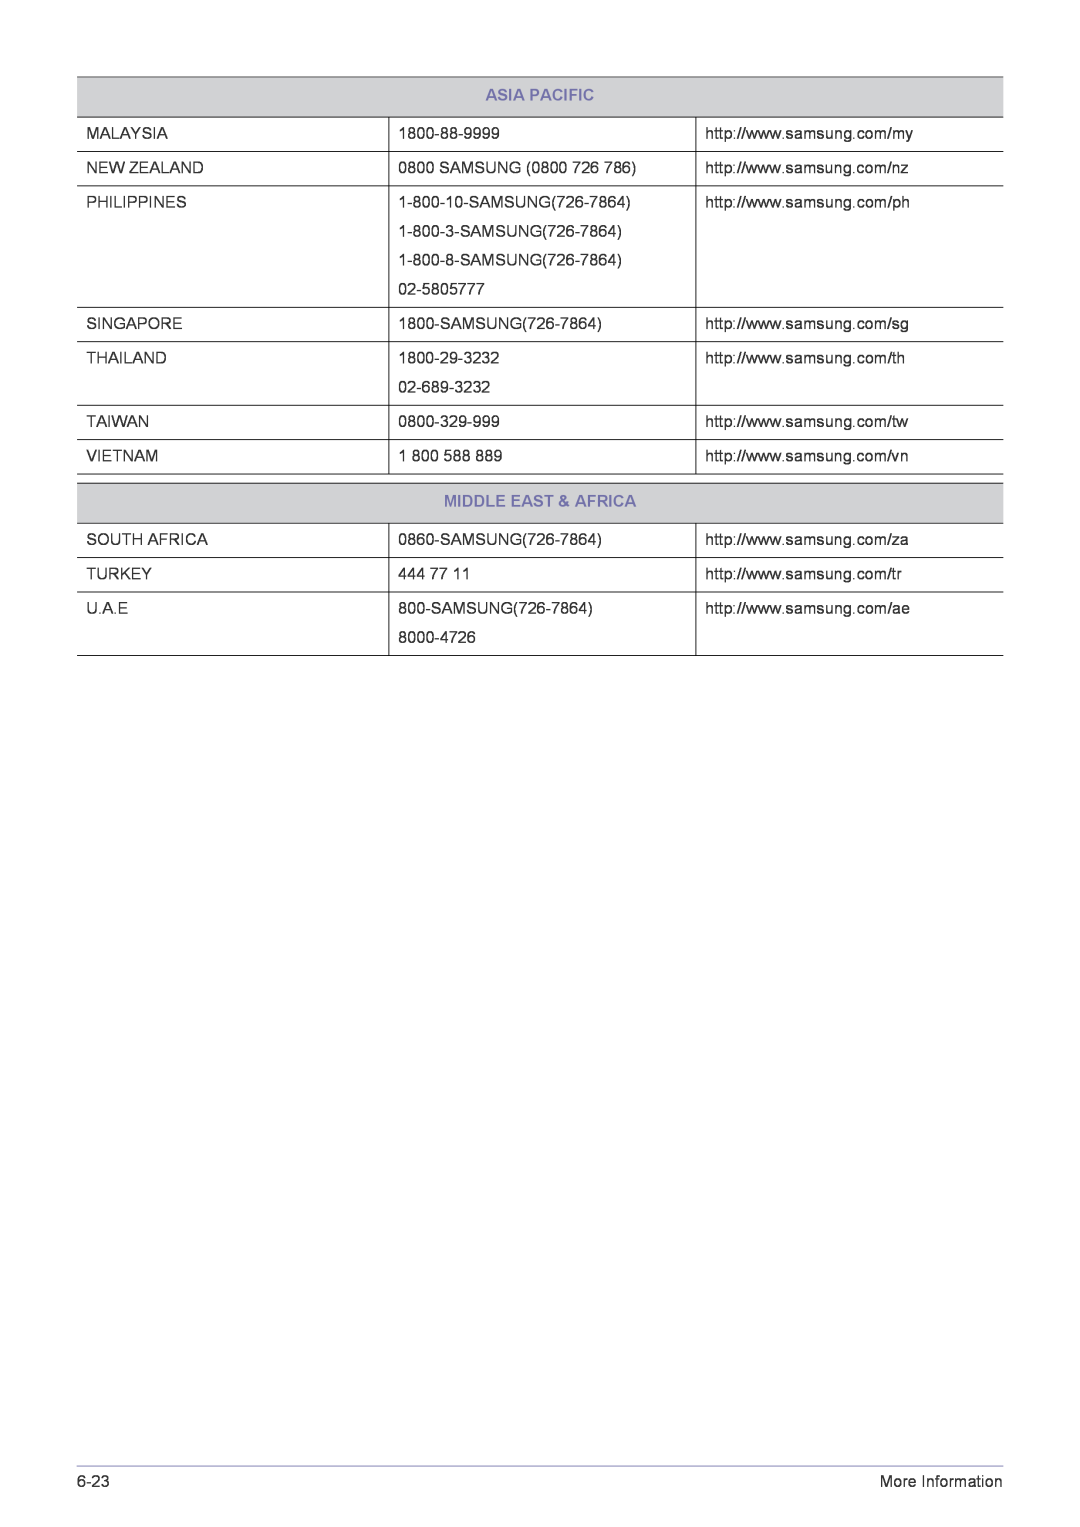 Samsung B1730NW, B2330, B2430L, B1930NW, B1630N, B2230W, B2230N, B2030N user manual Asia Pacific, Middle East & Africa 